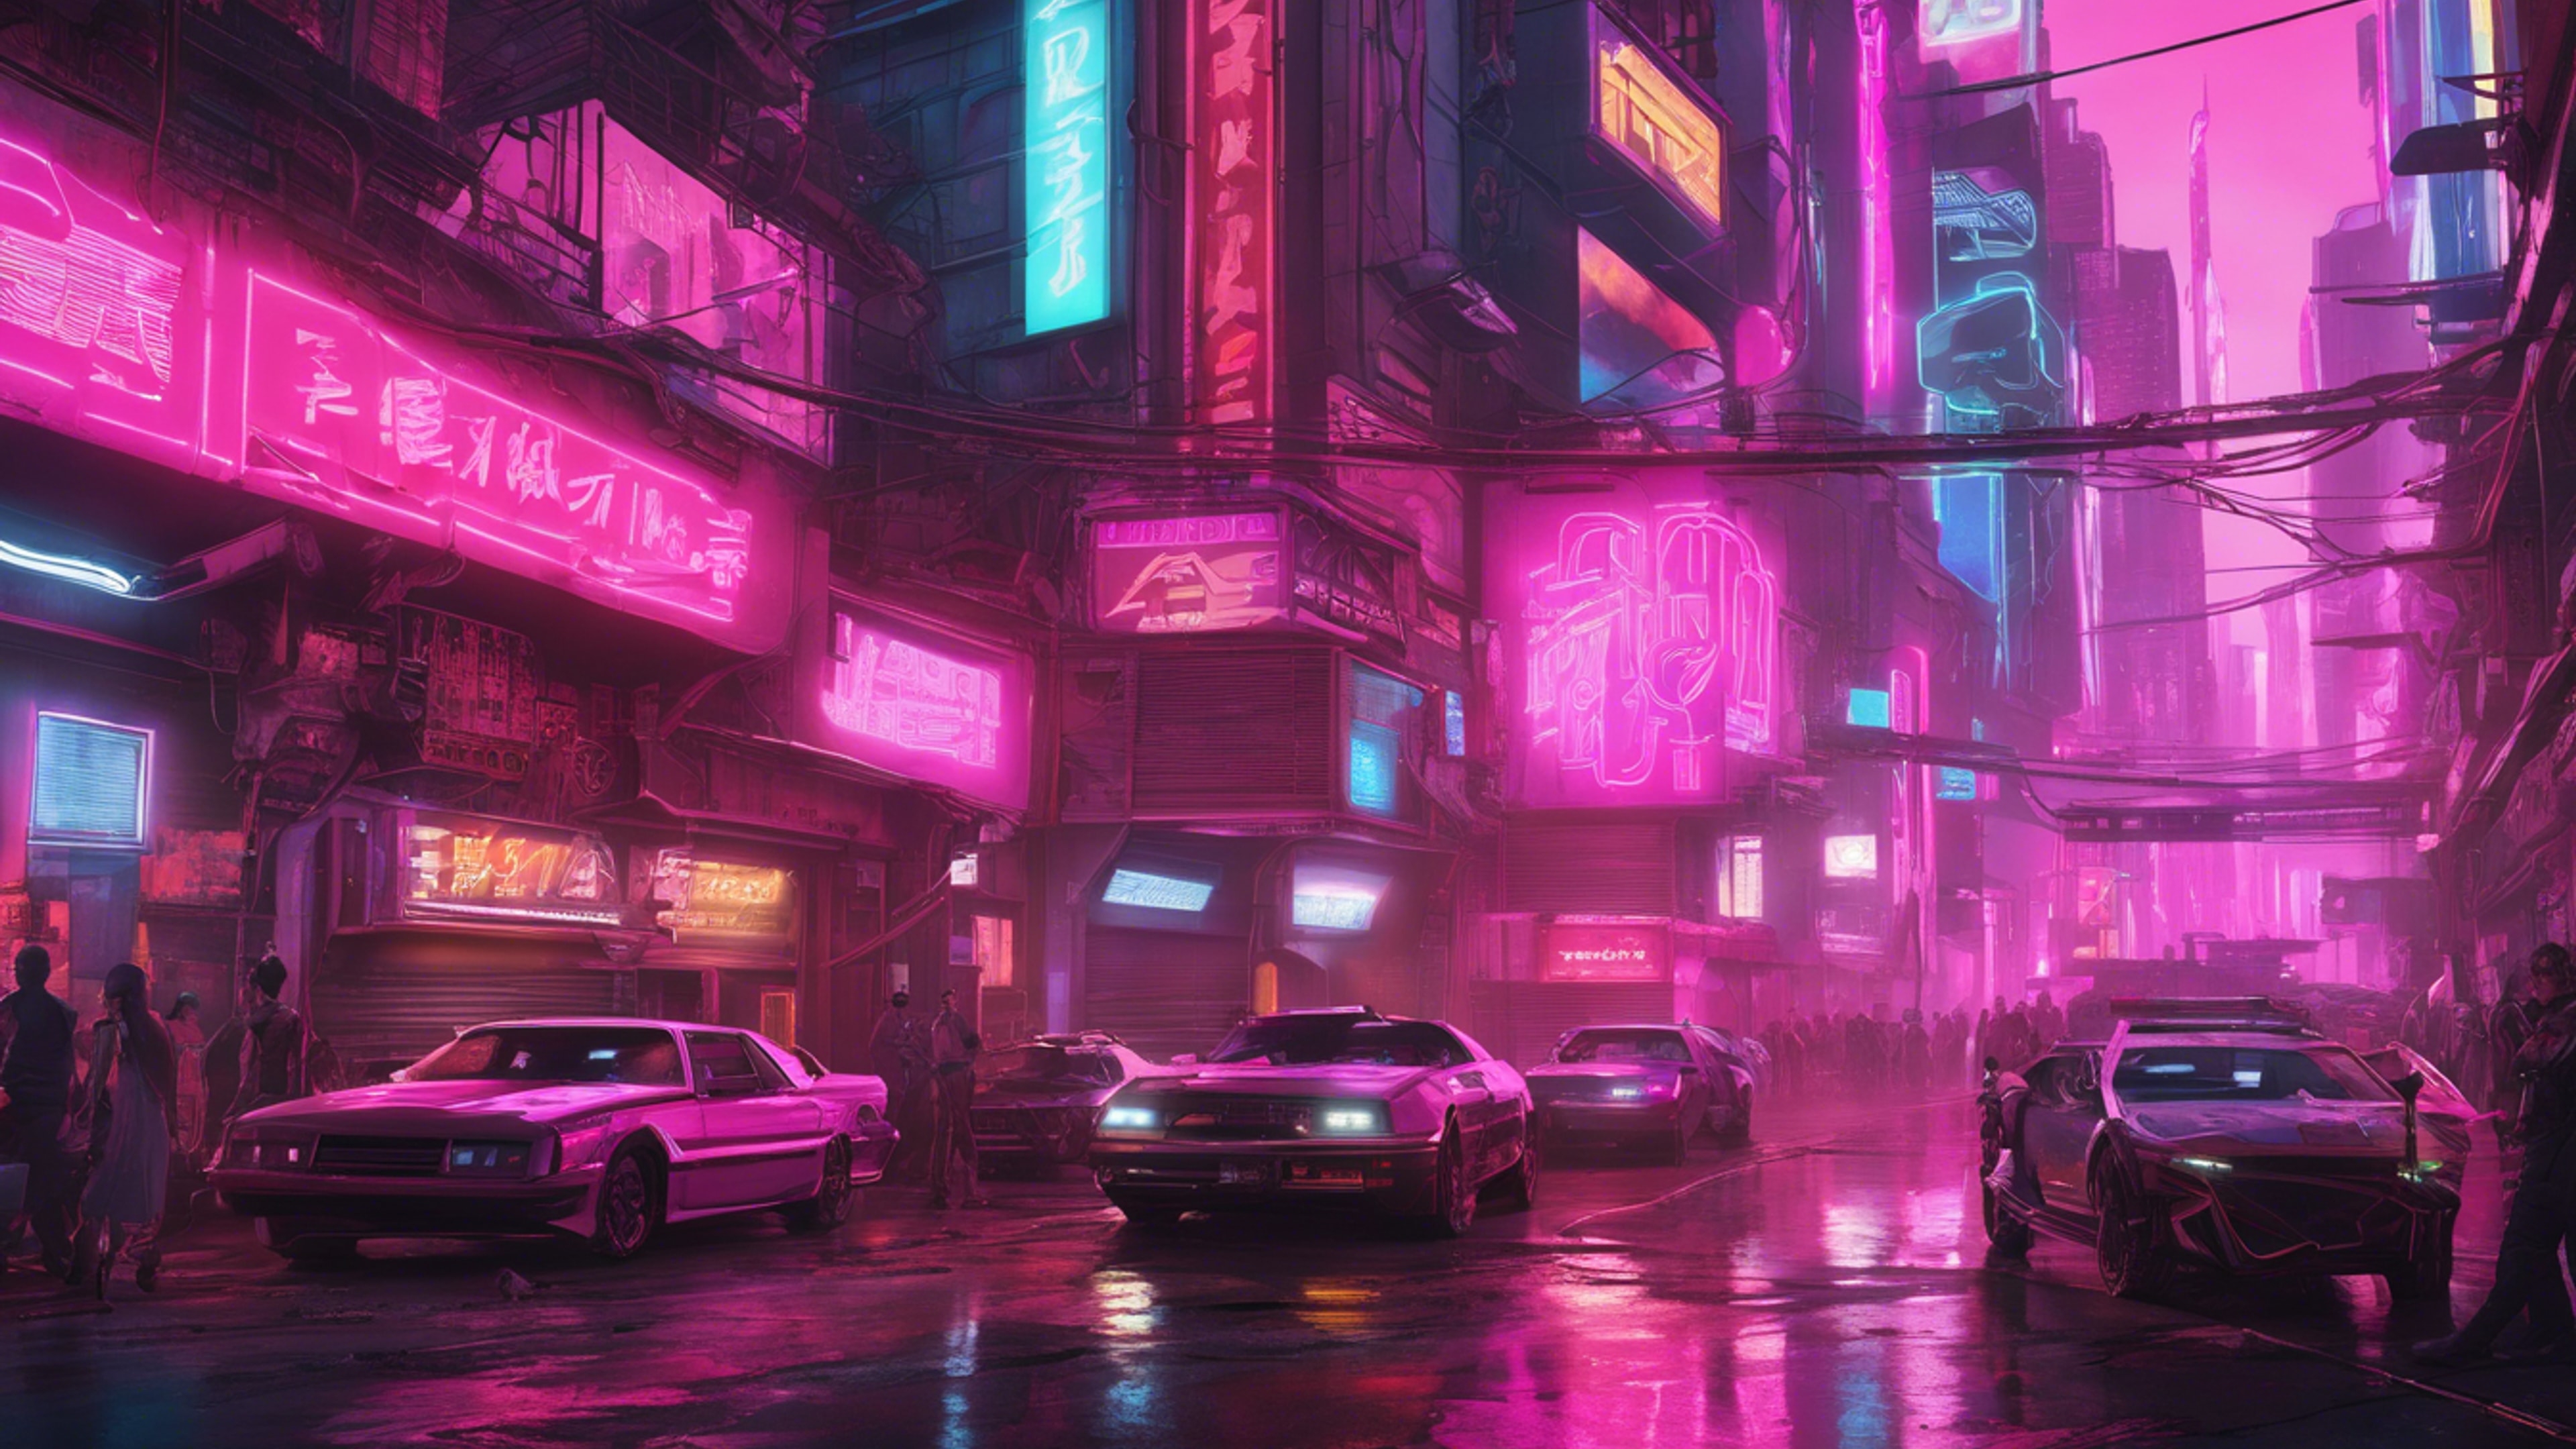 A wide-angle view of a bustling city street in the future, dominated by pink neon signs. Hình nền[5759e15553a14a8aa13a]